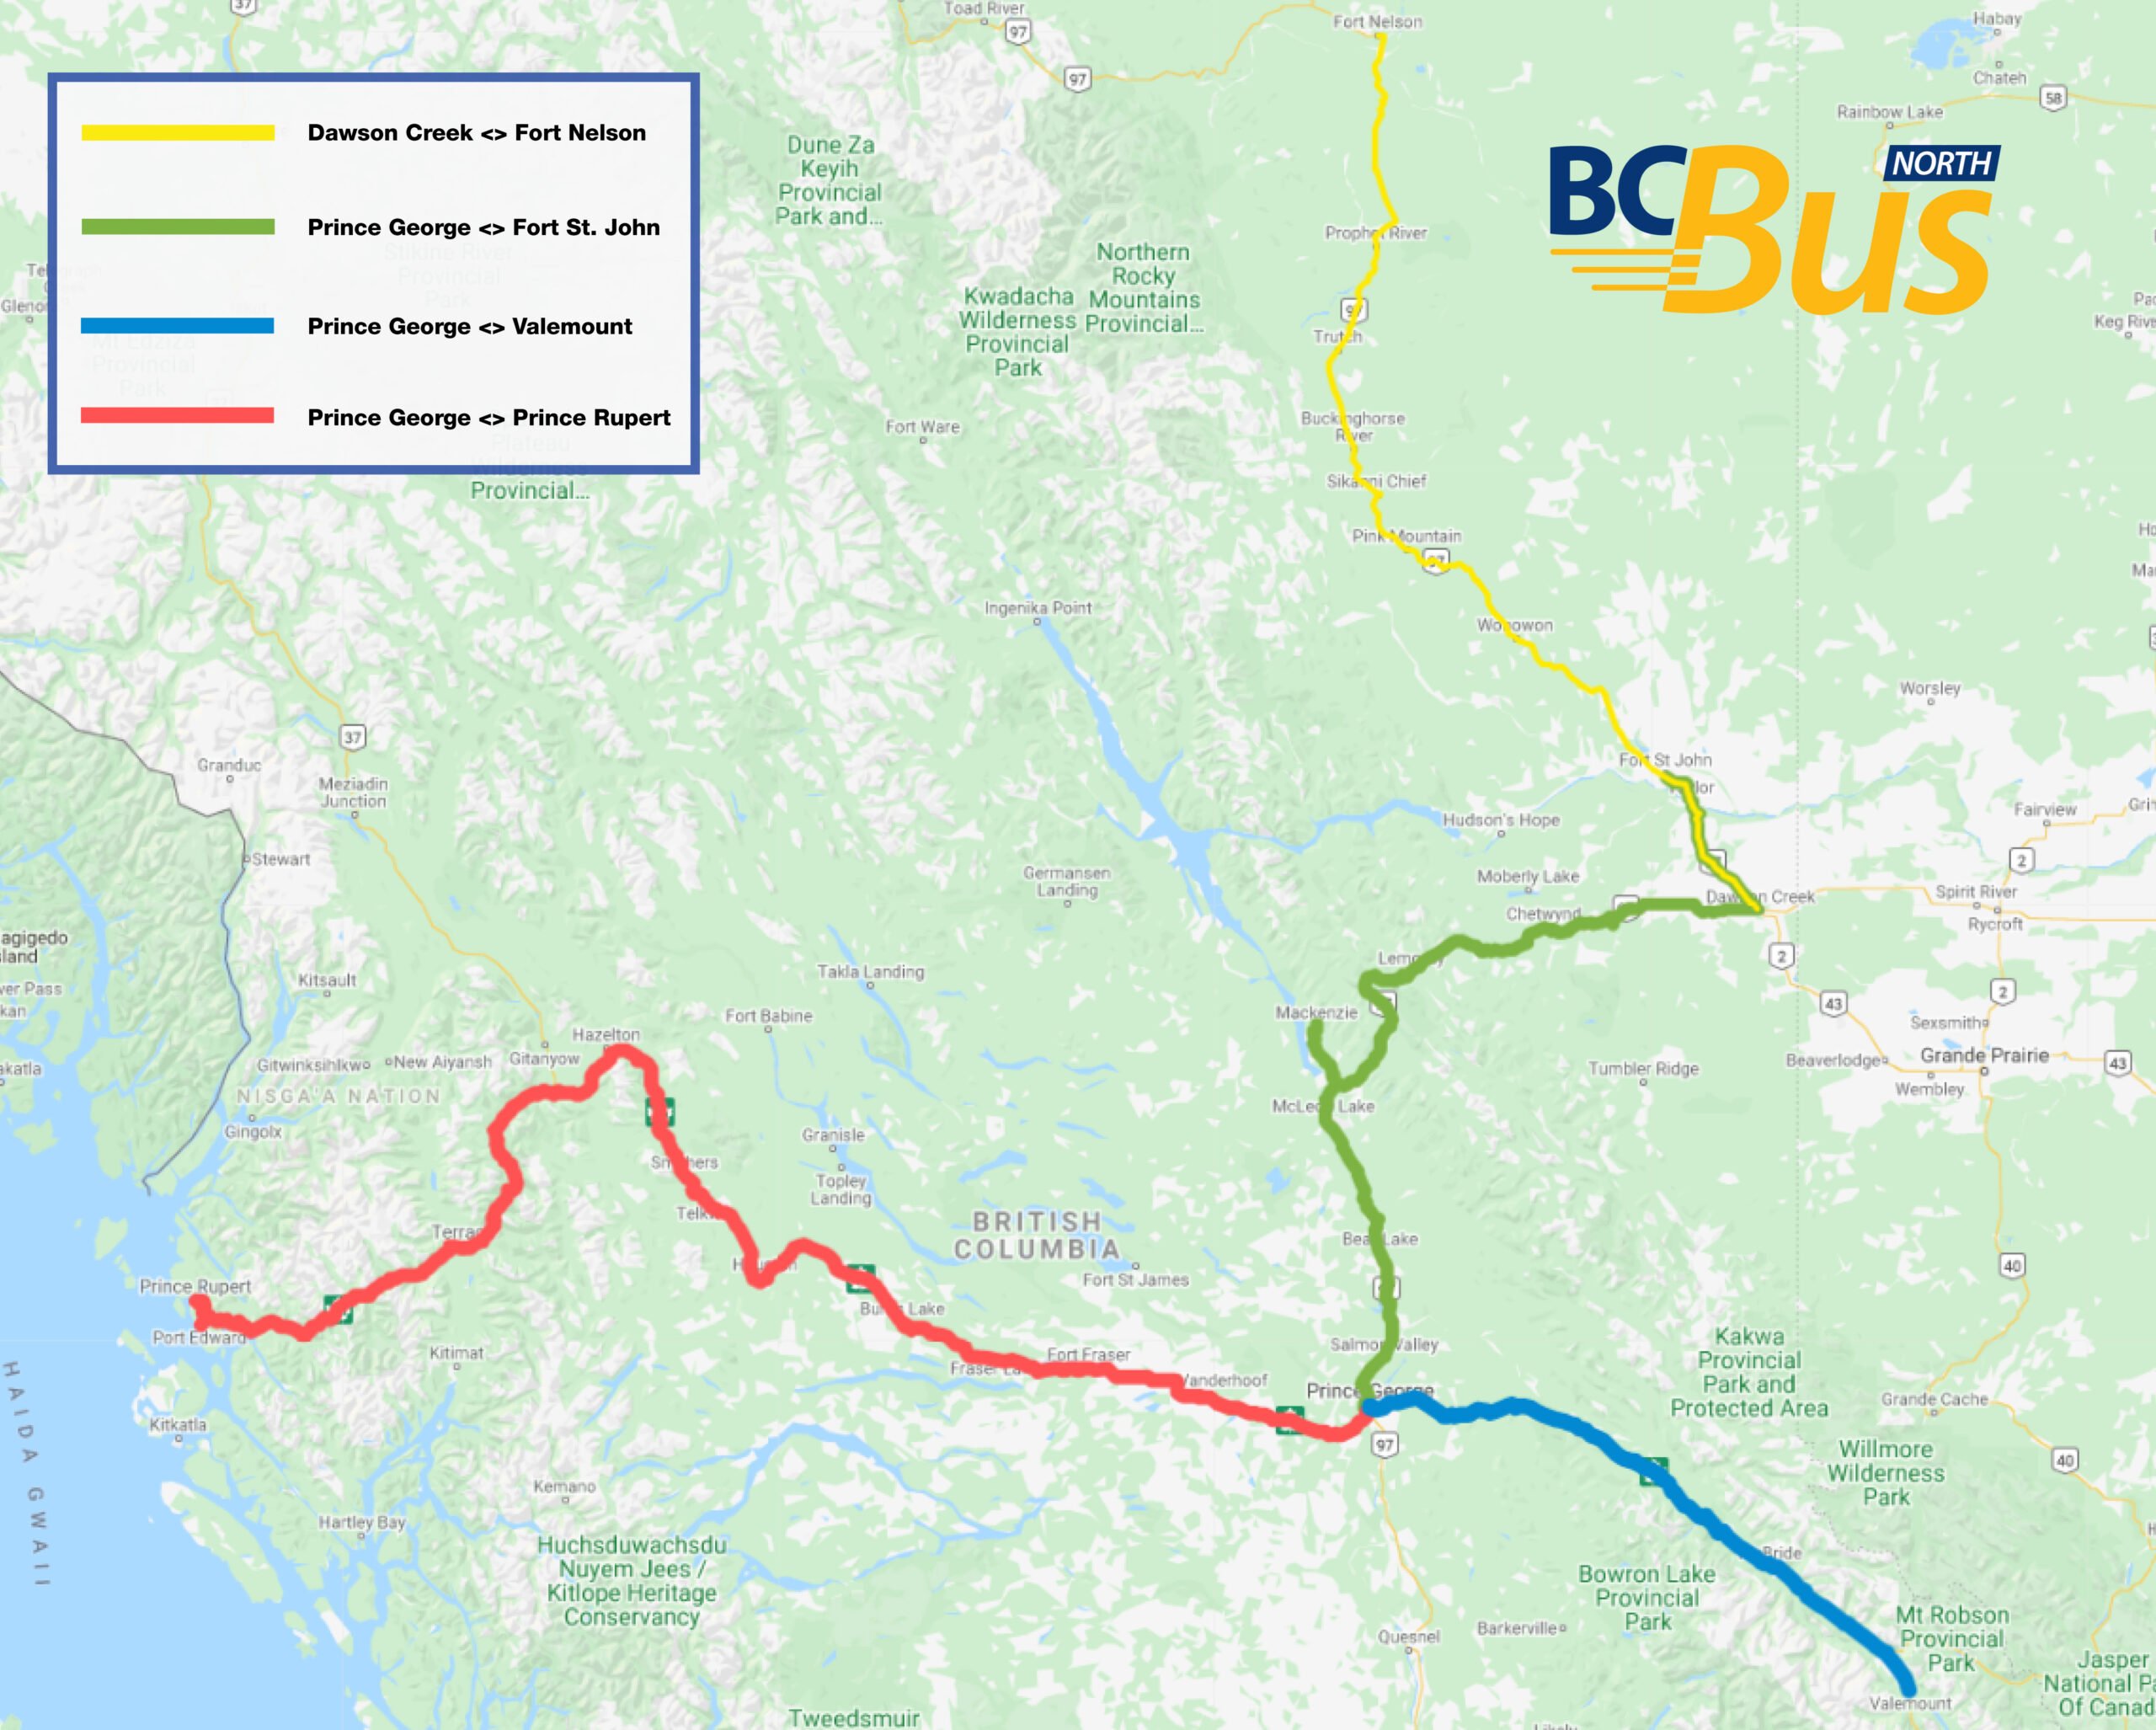 BC Bus North route map and locations